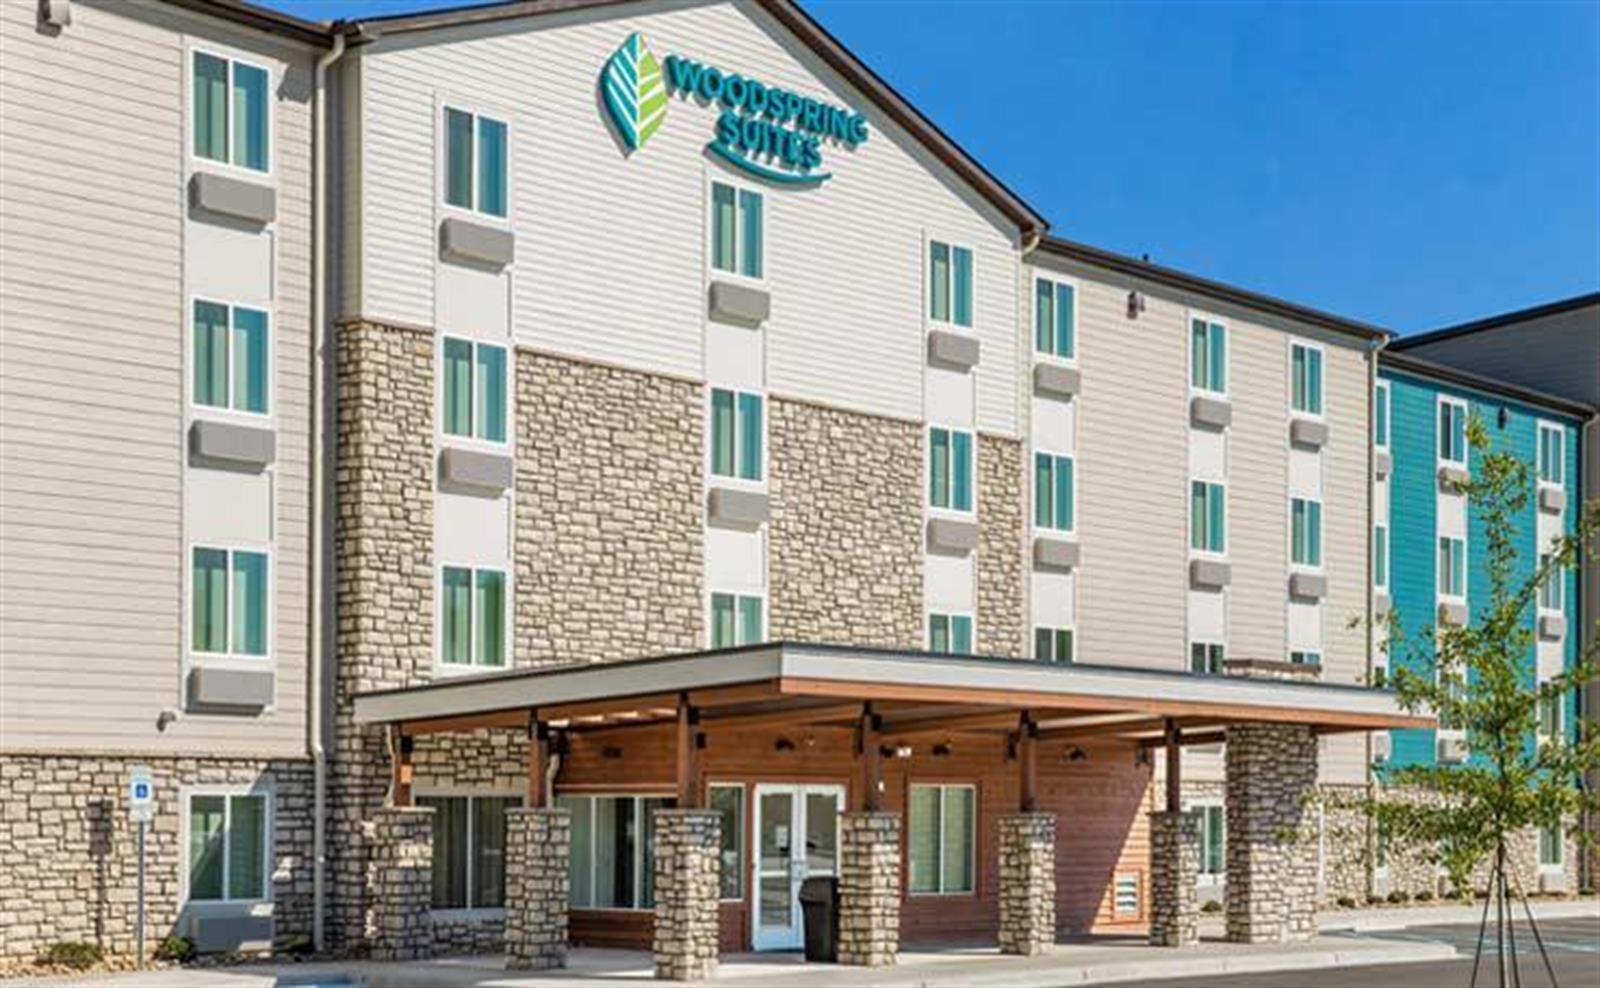 WOODSPRING-SUITES-GREENVILHAYWOOD-EXTENDED-STAY-HOTEL-EXTERIOR-DAY-2-738X456_800